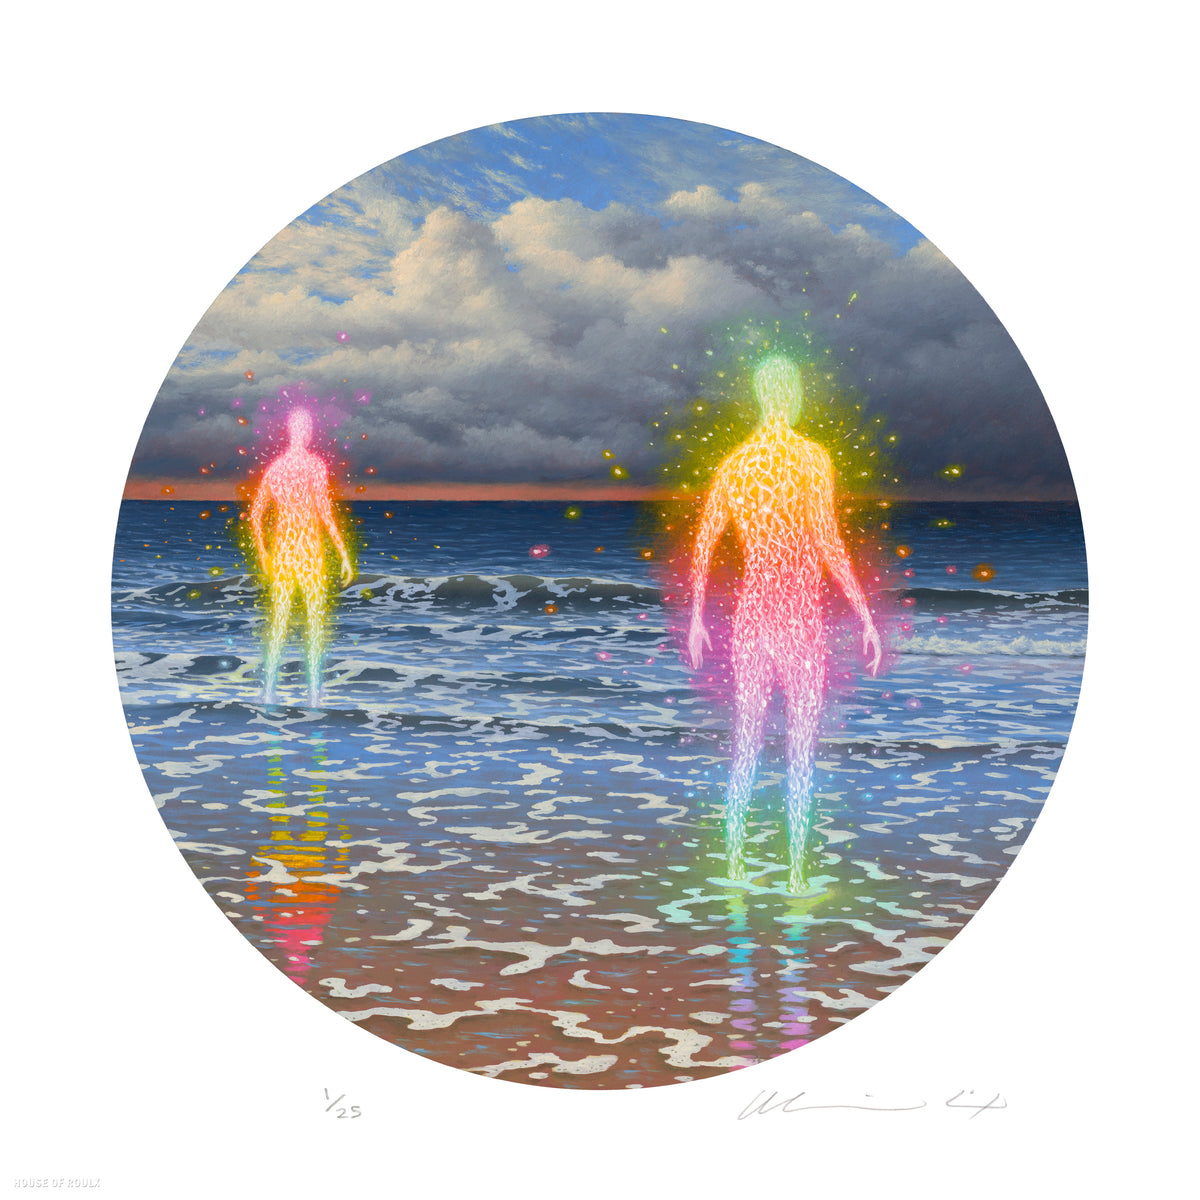 Adrian Cox &quot;Spectral Witnesses with Oncoming Storm&quot; - Archival Print, Limited Edition of 25 - 17 x 17&quot;